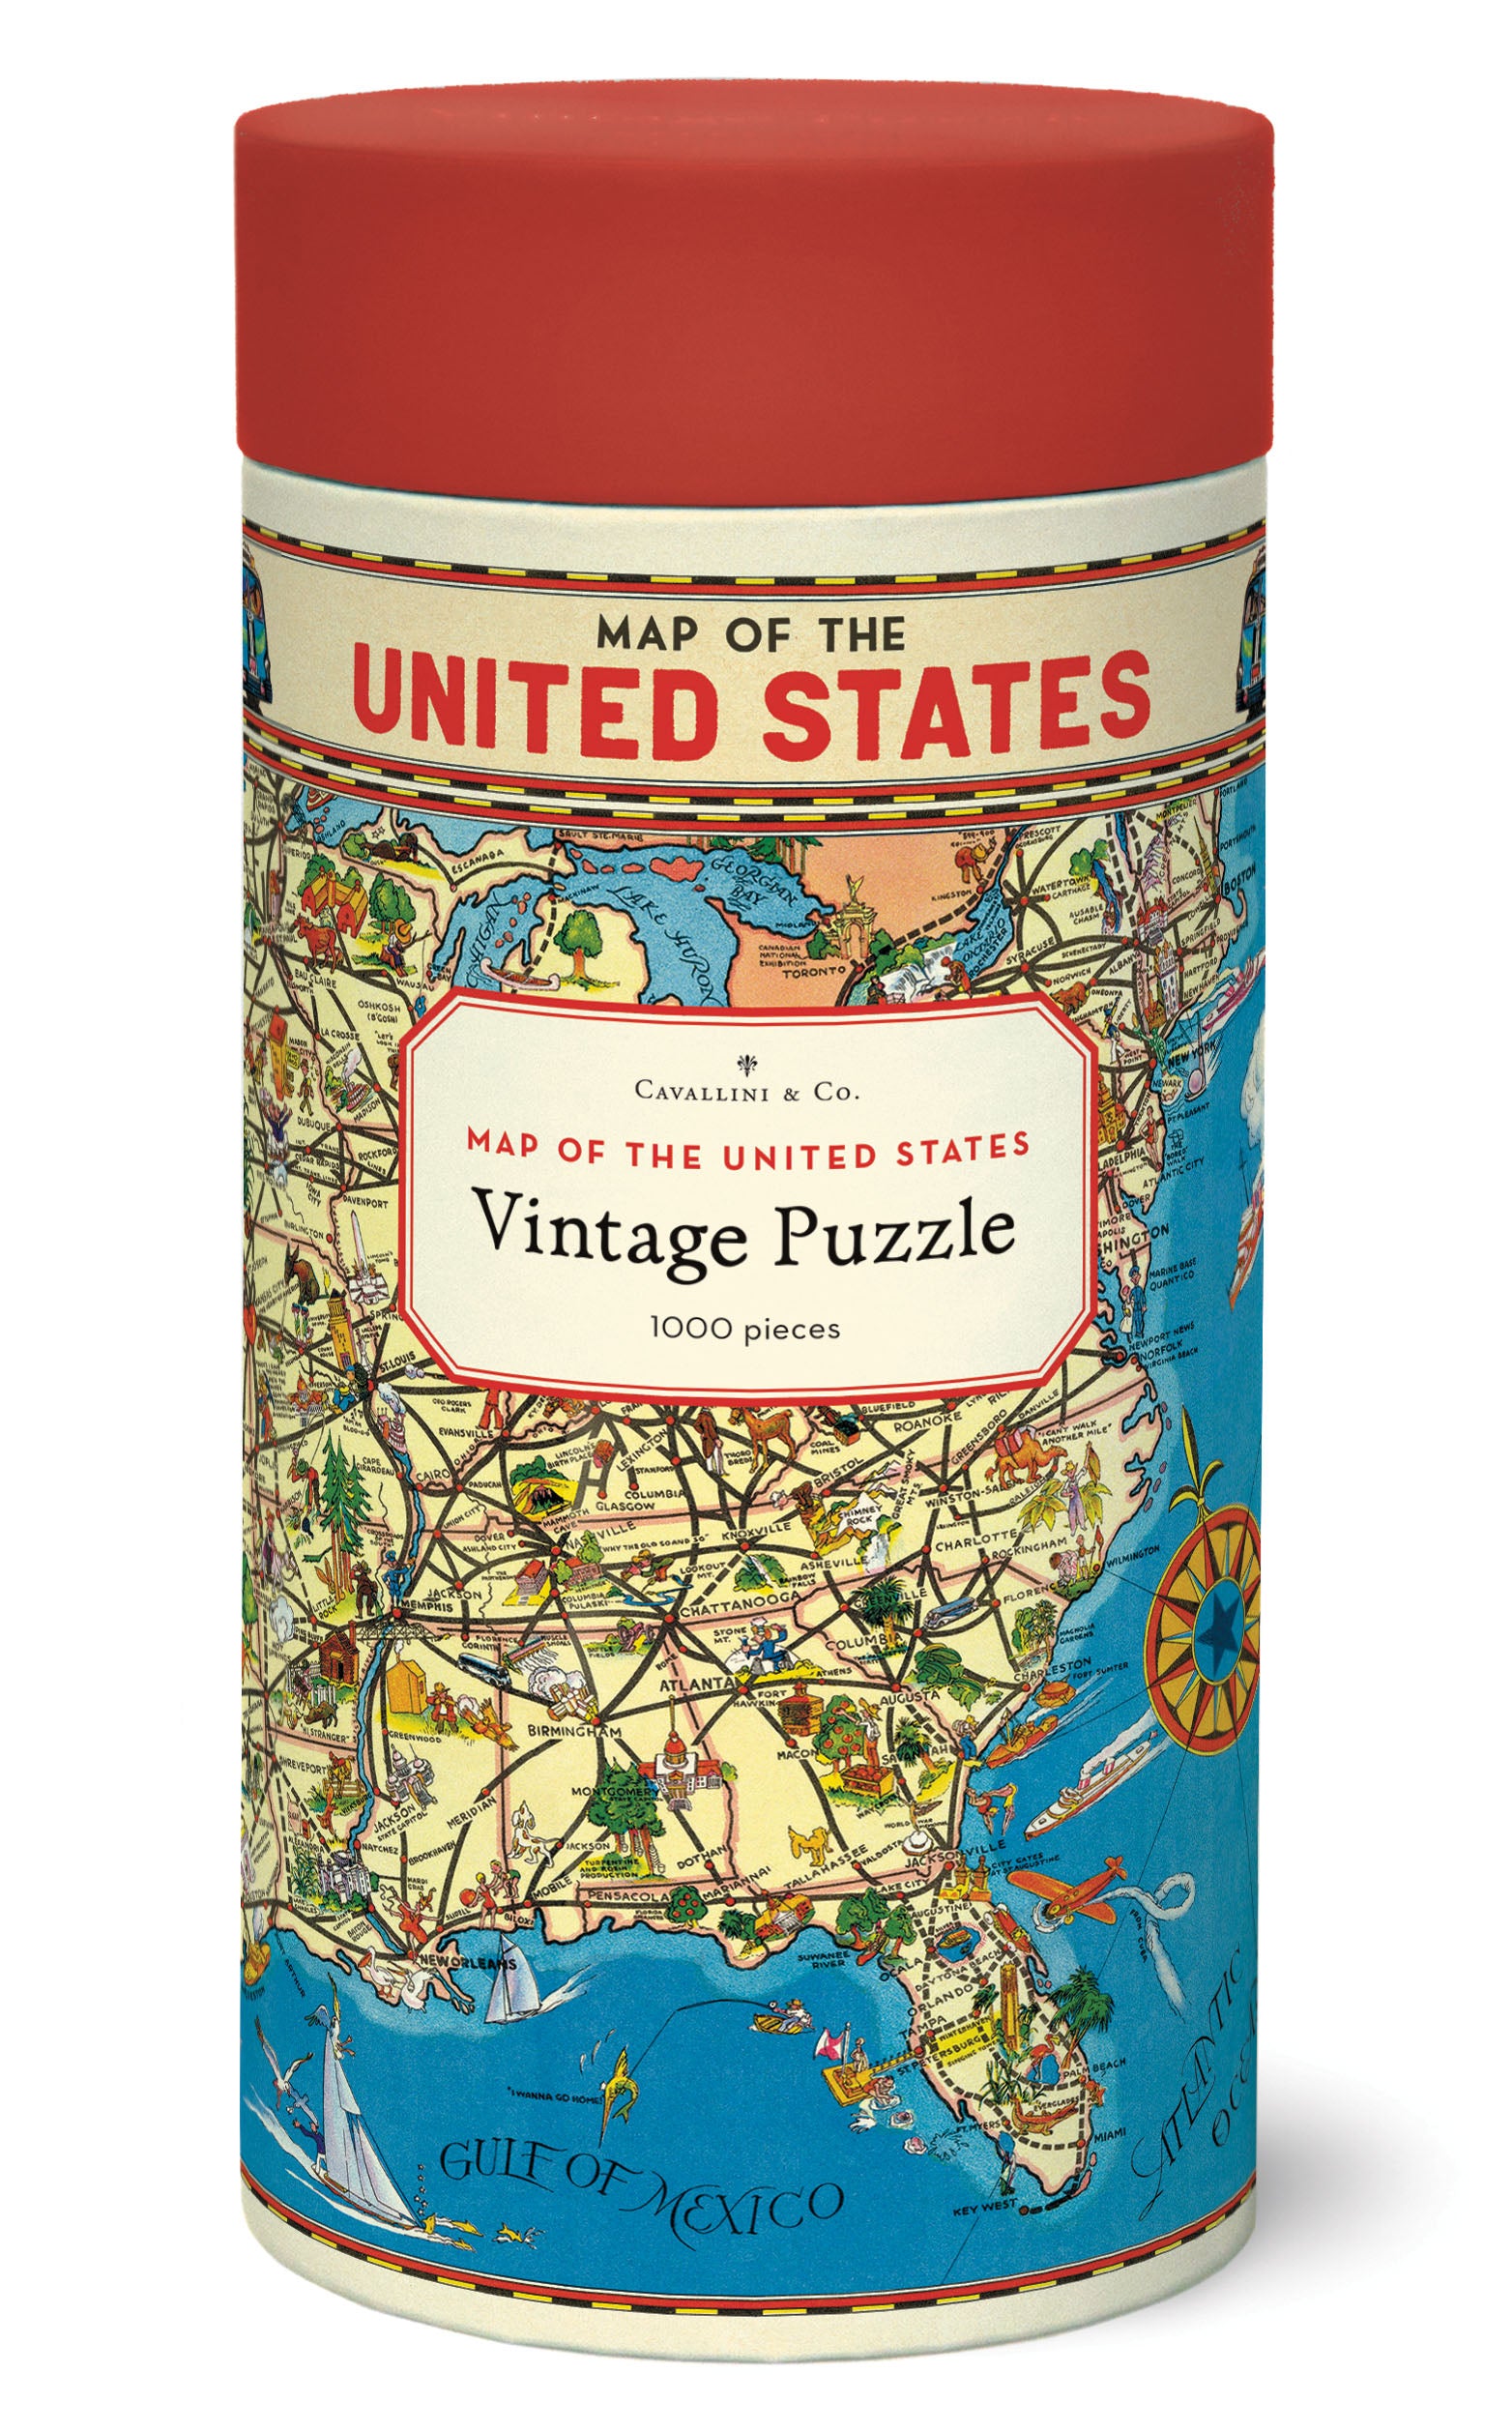 Cavallini & Co. Map of the United States 1000 Piece Puzzle